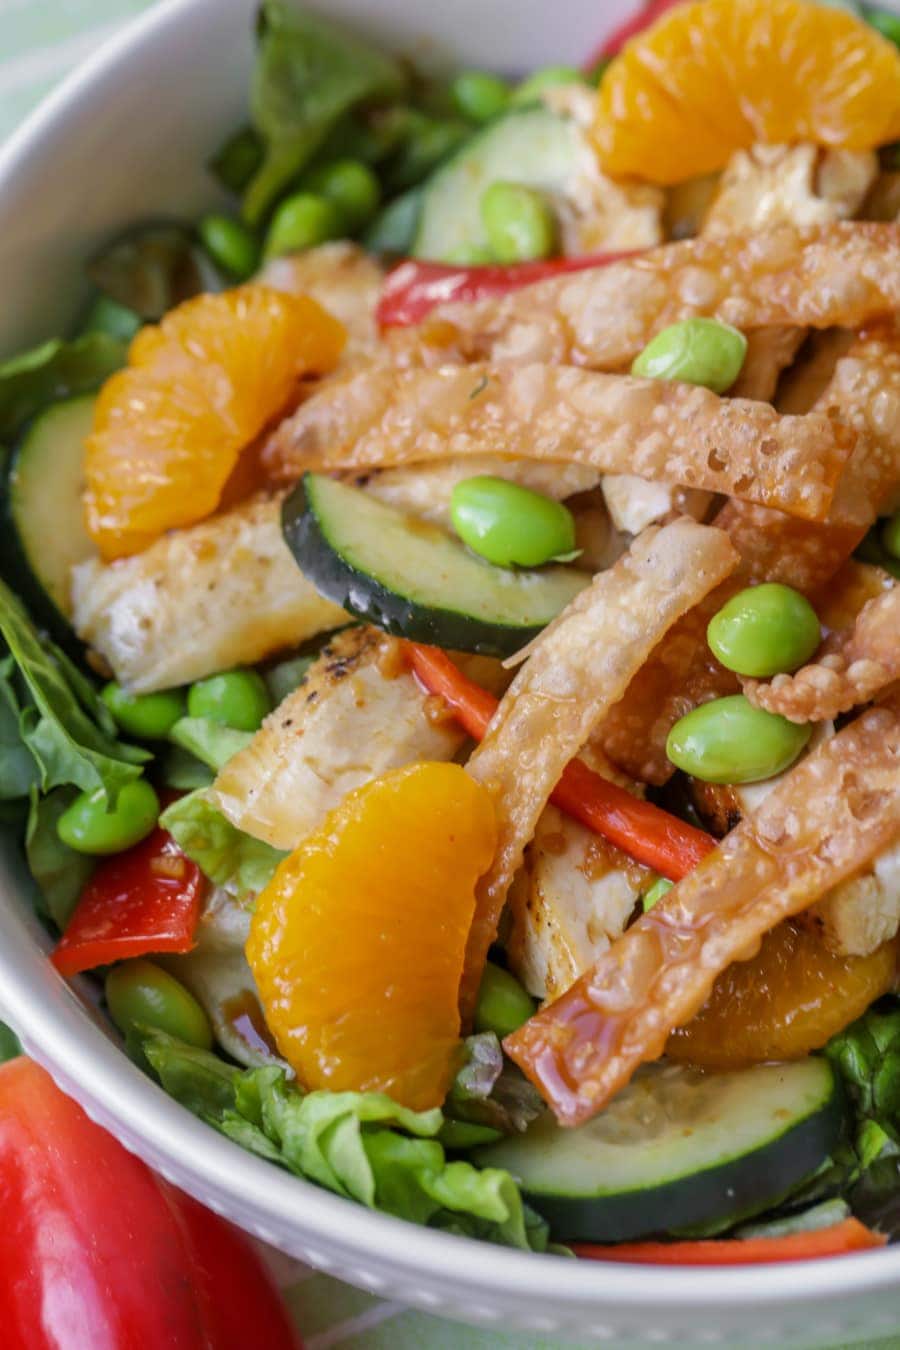 Quick dinner ideas - asian citrus salad topped with wontons.